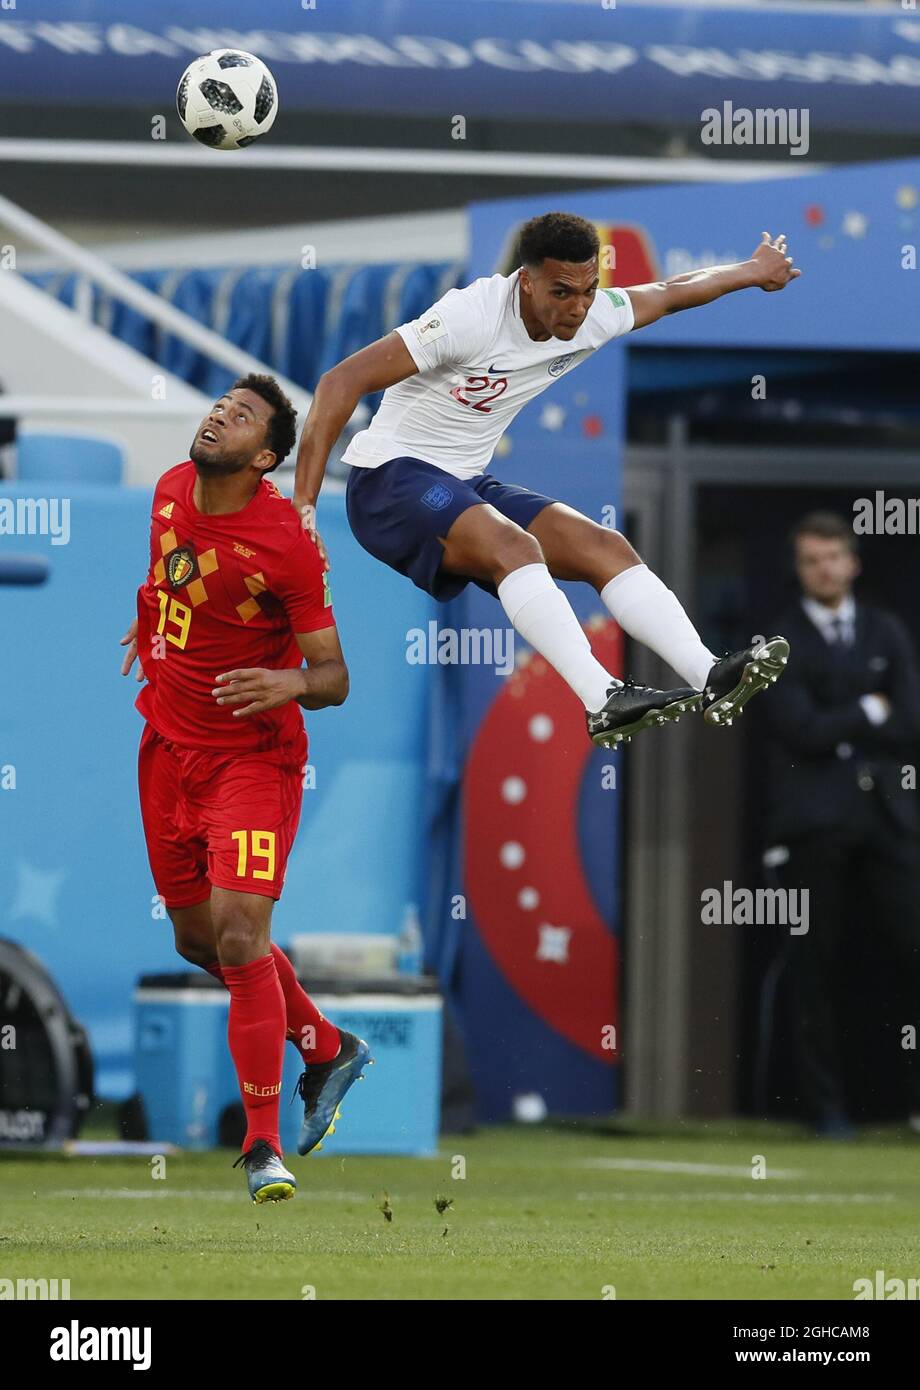 Moussa Dembele of Belgium and Trent Alexander-Arnold of England during the FIFA World Cup 2018 Group G match at the Kaliningrad Stadium, Kaliningrad. Picture date 28th June 2018. Picture credit should read: David Klein/Sportimage via PA Images Stock Photo